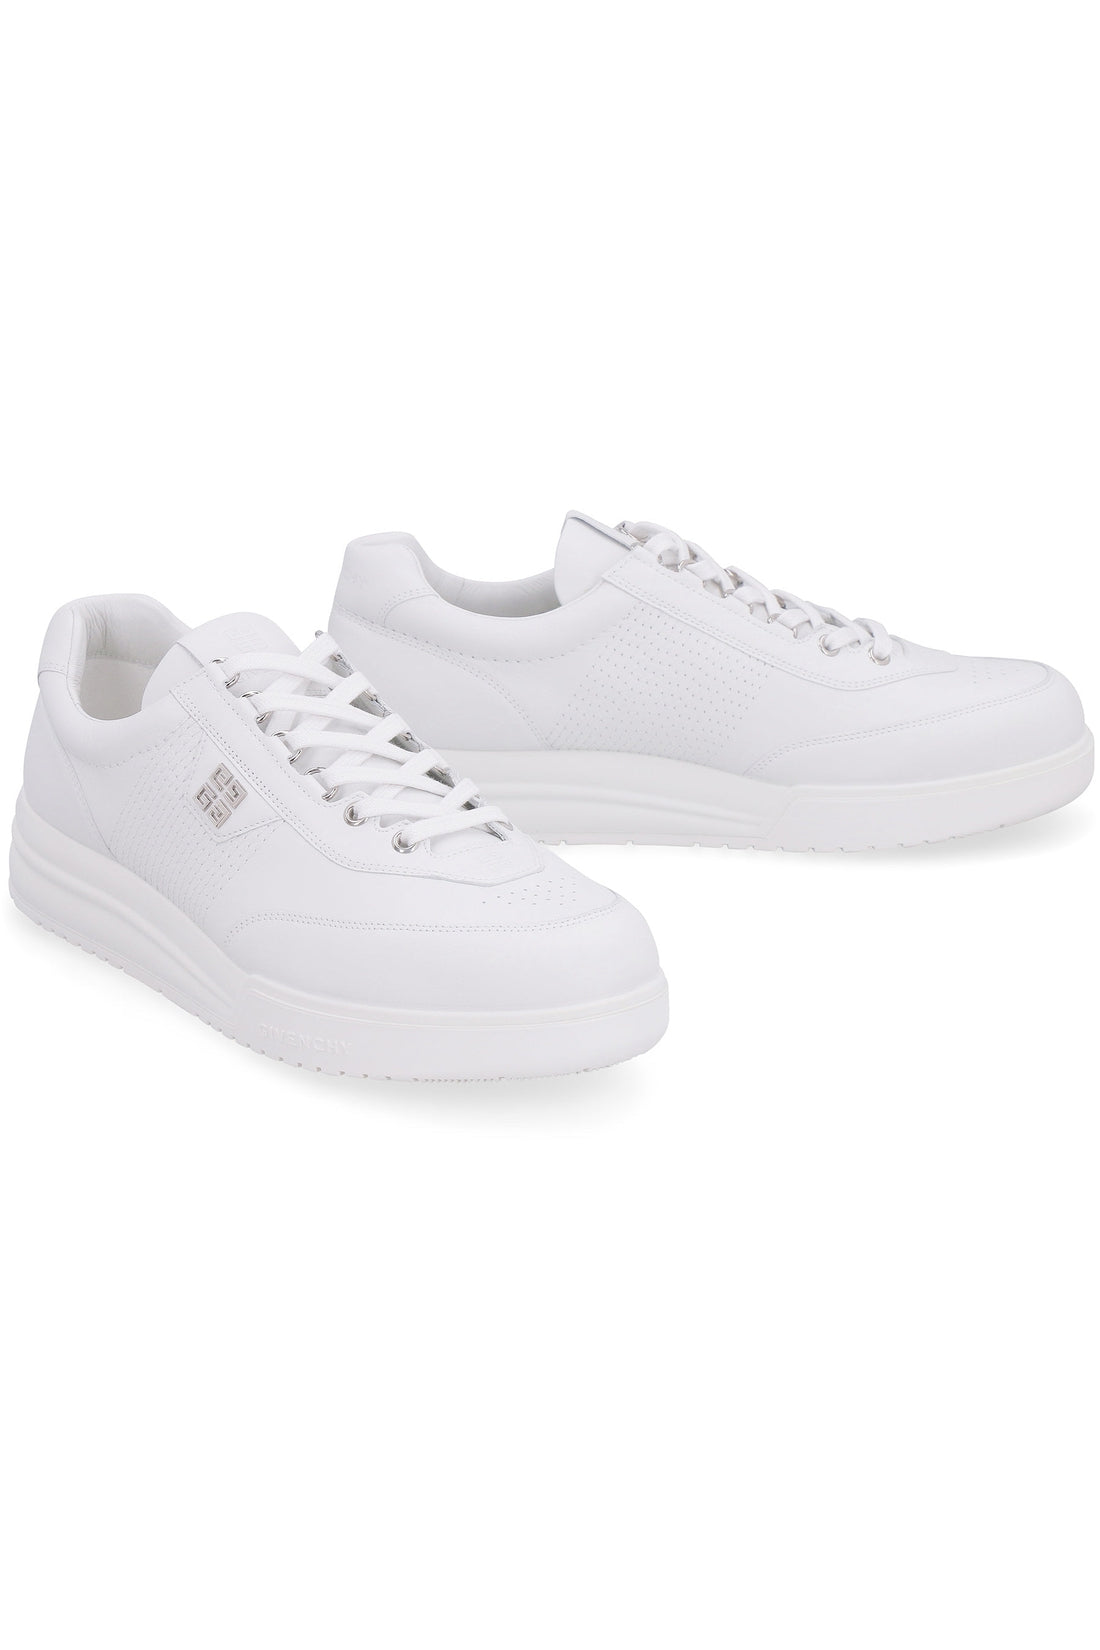 Givenchy-OUTLET-SALE-G4 leather low-top sneakers-ARCHIVIST